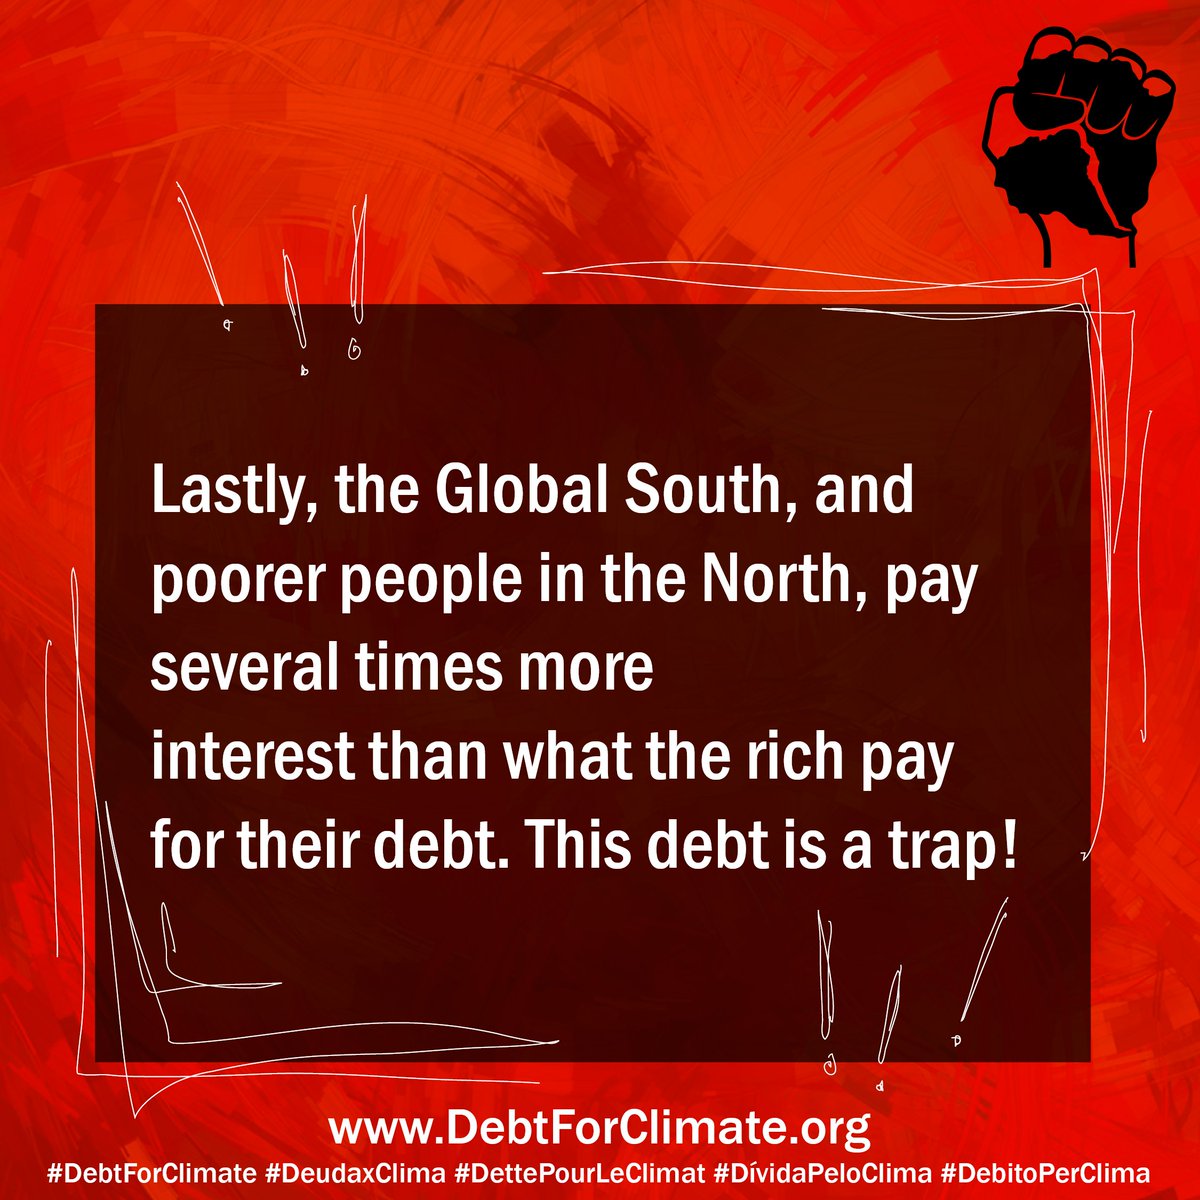 5/5 💯Lastly, the Global South, and poorer people in the North, pay several times more interest than what the rich pay for their debt. This debt is a trap! #DebtForClimate #DeudaXClima